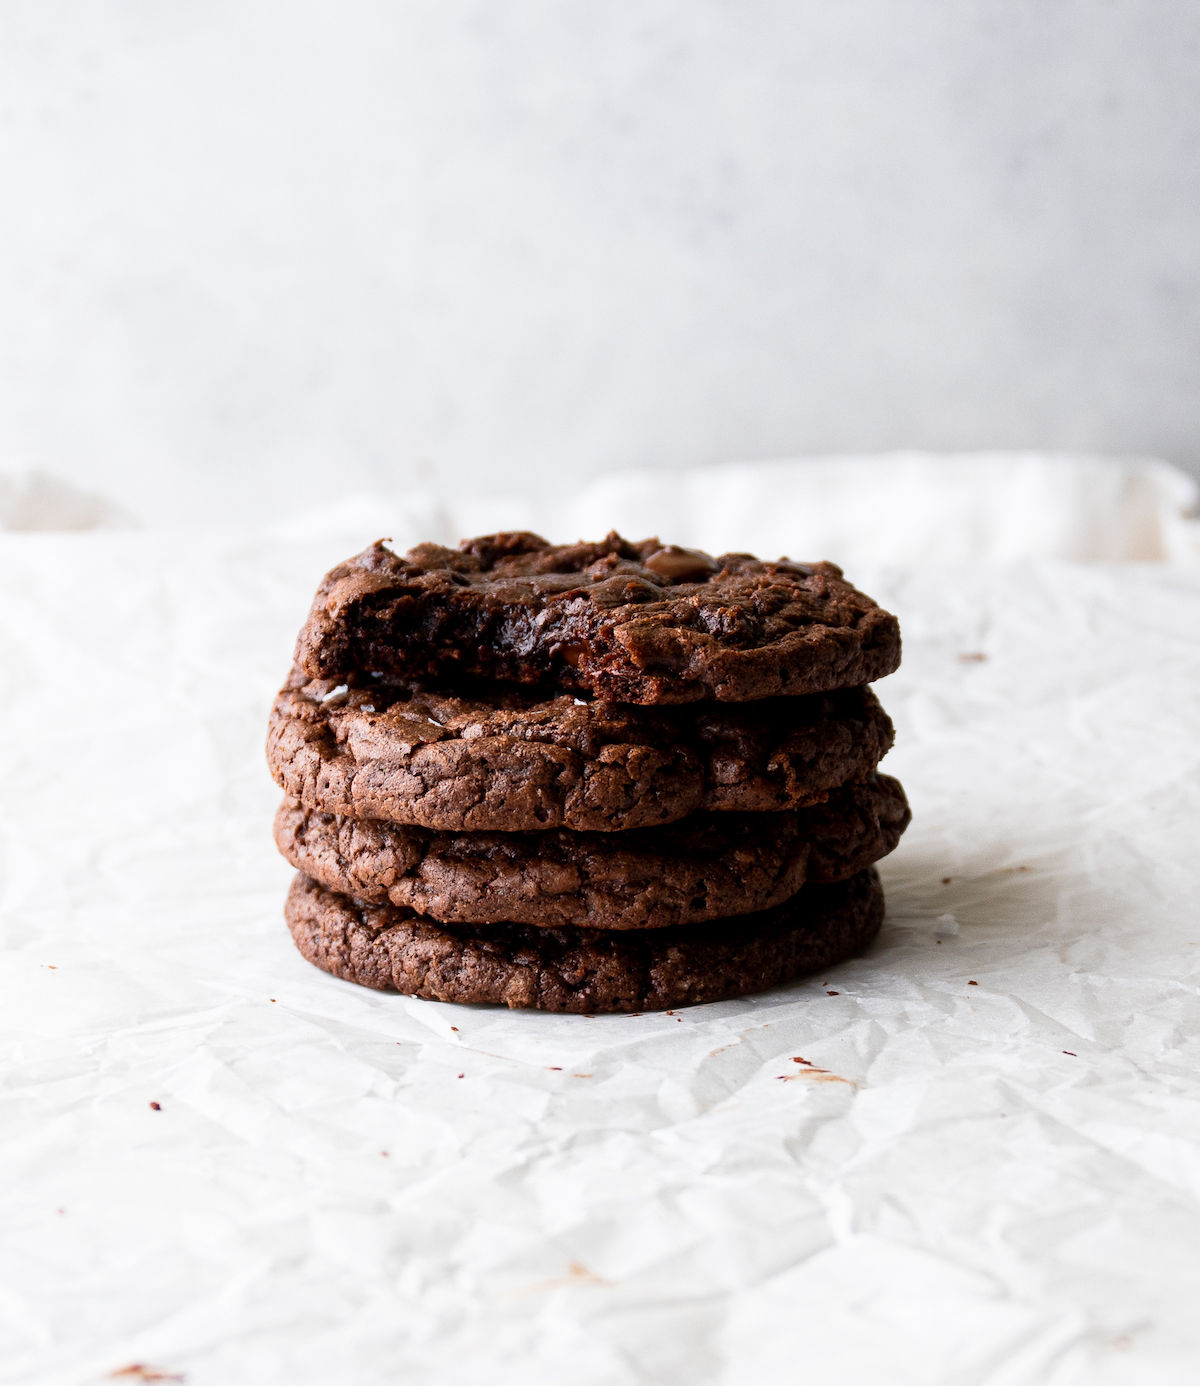 A stack of chocolate cookies with the top one missing a bite.